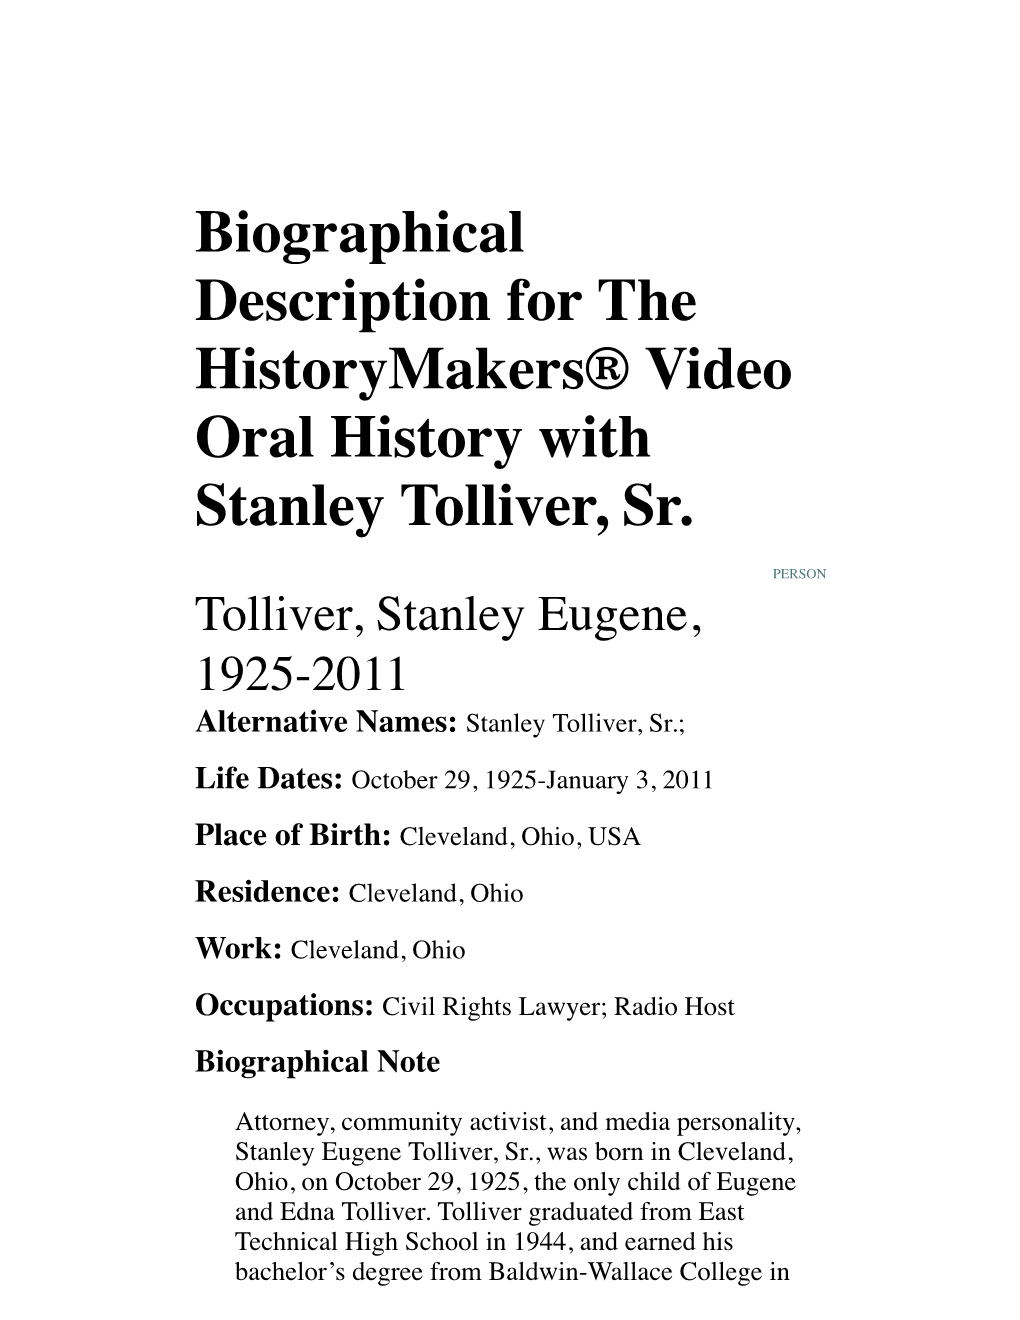 Biographical Description for the Historymakers® Video Oral History with Stanley Tolliver, Sr